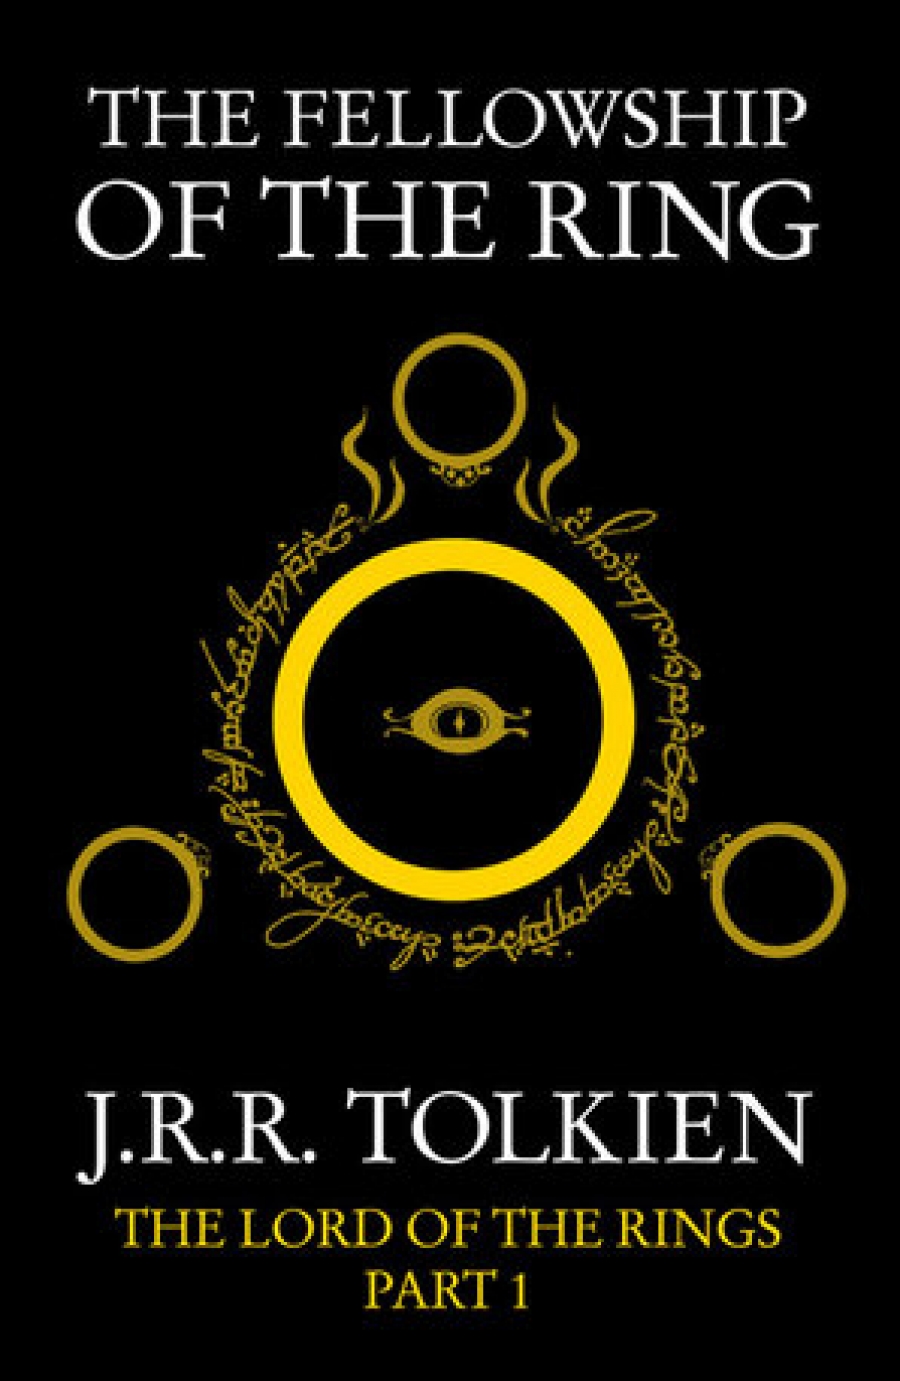 Tolkien, J.R.R. The Fellowship of the Ring 